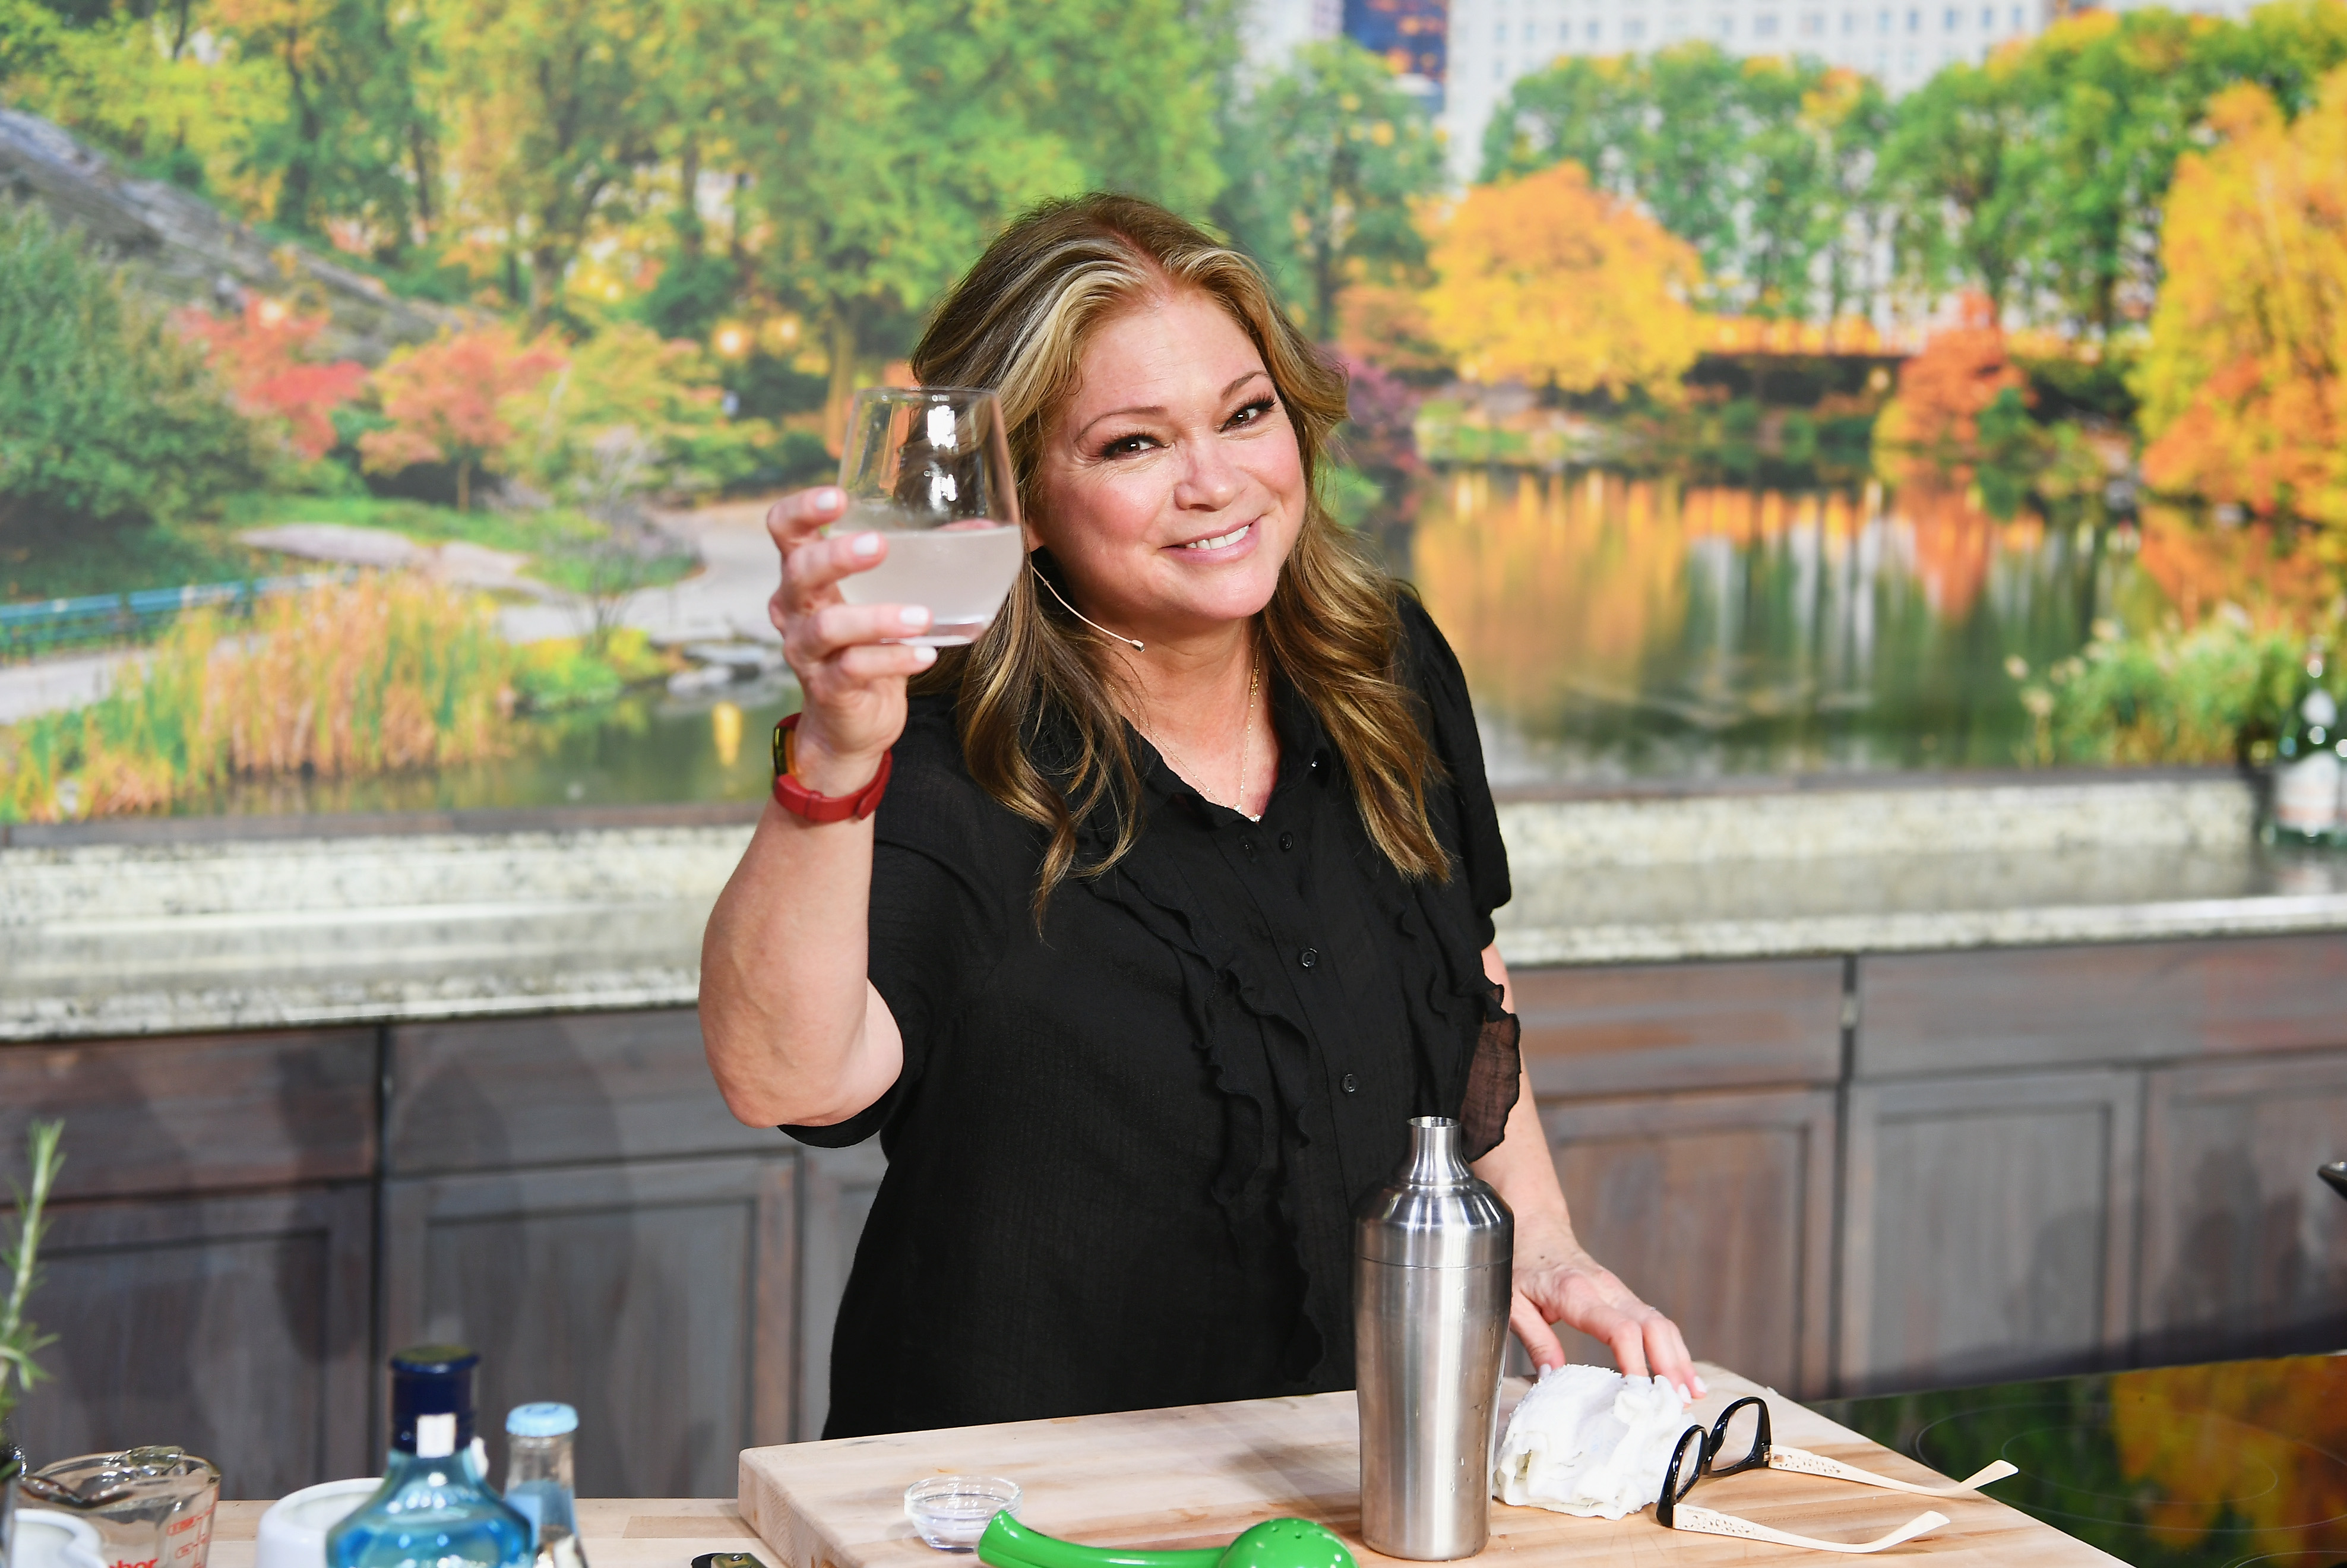 Food Network host Valerie Bertinelli raises a glass at a 2018 Food Network event.